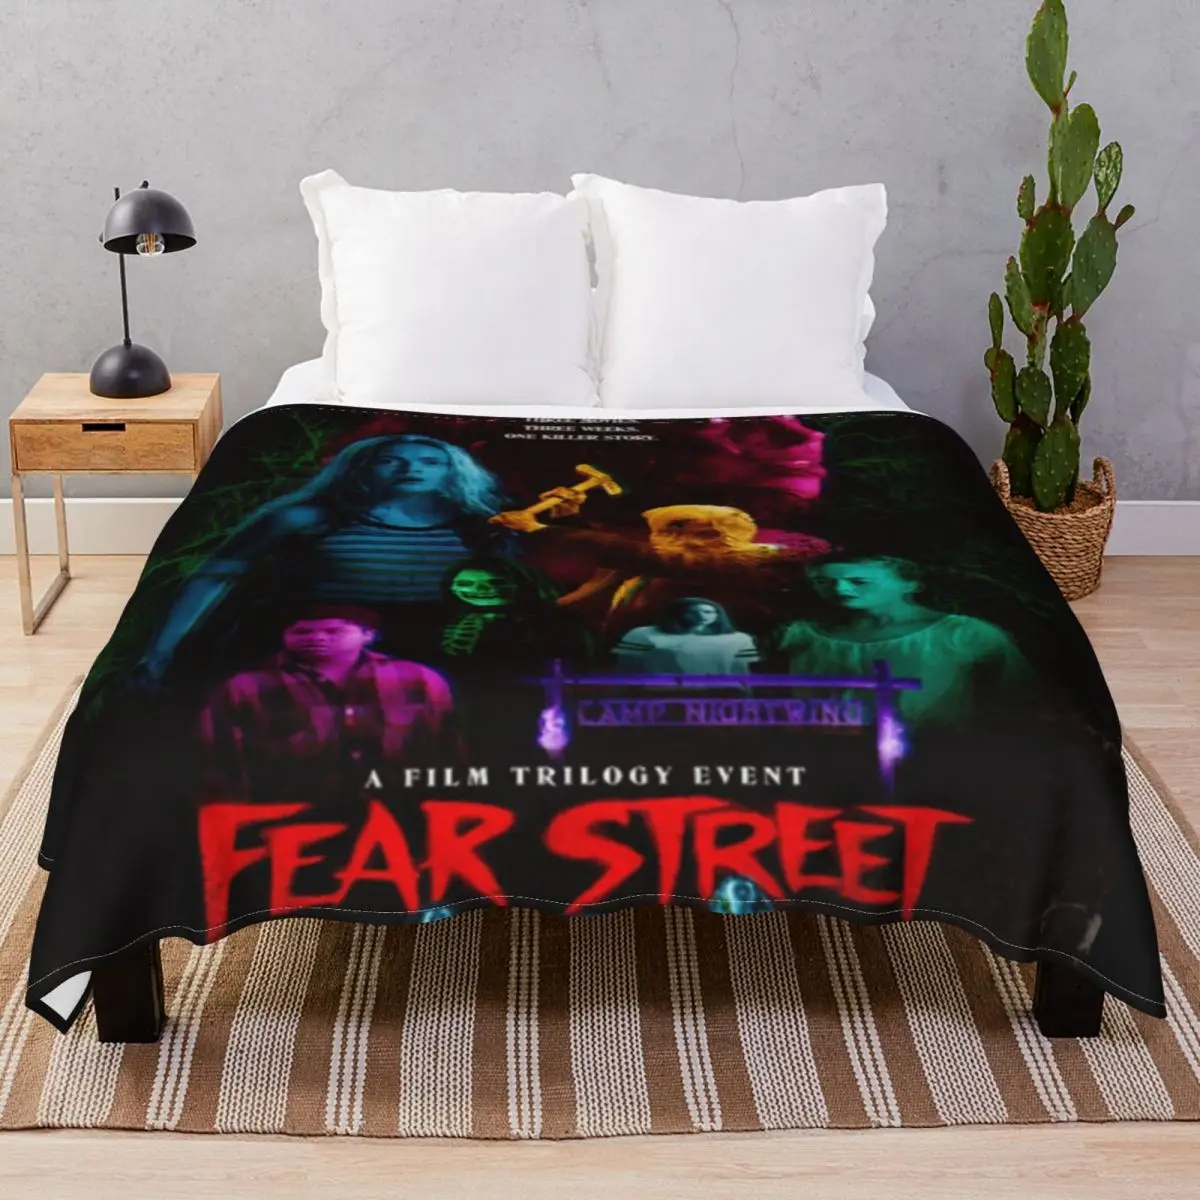 Fear Street Trilogy Blankets Fleece Decoration Lightweight Unisex Throw Blanket for Bed Home Couch Travel Cinema